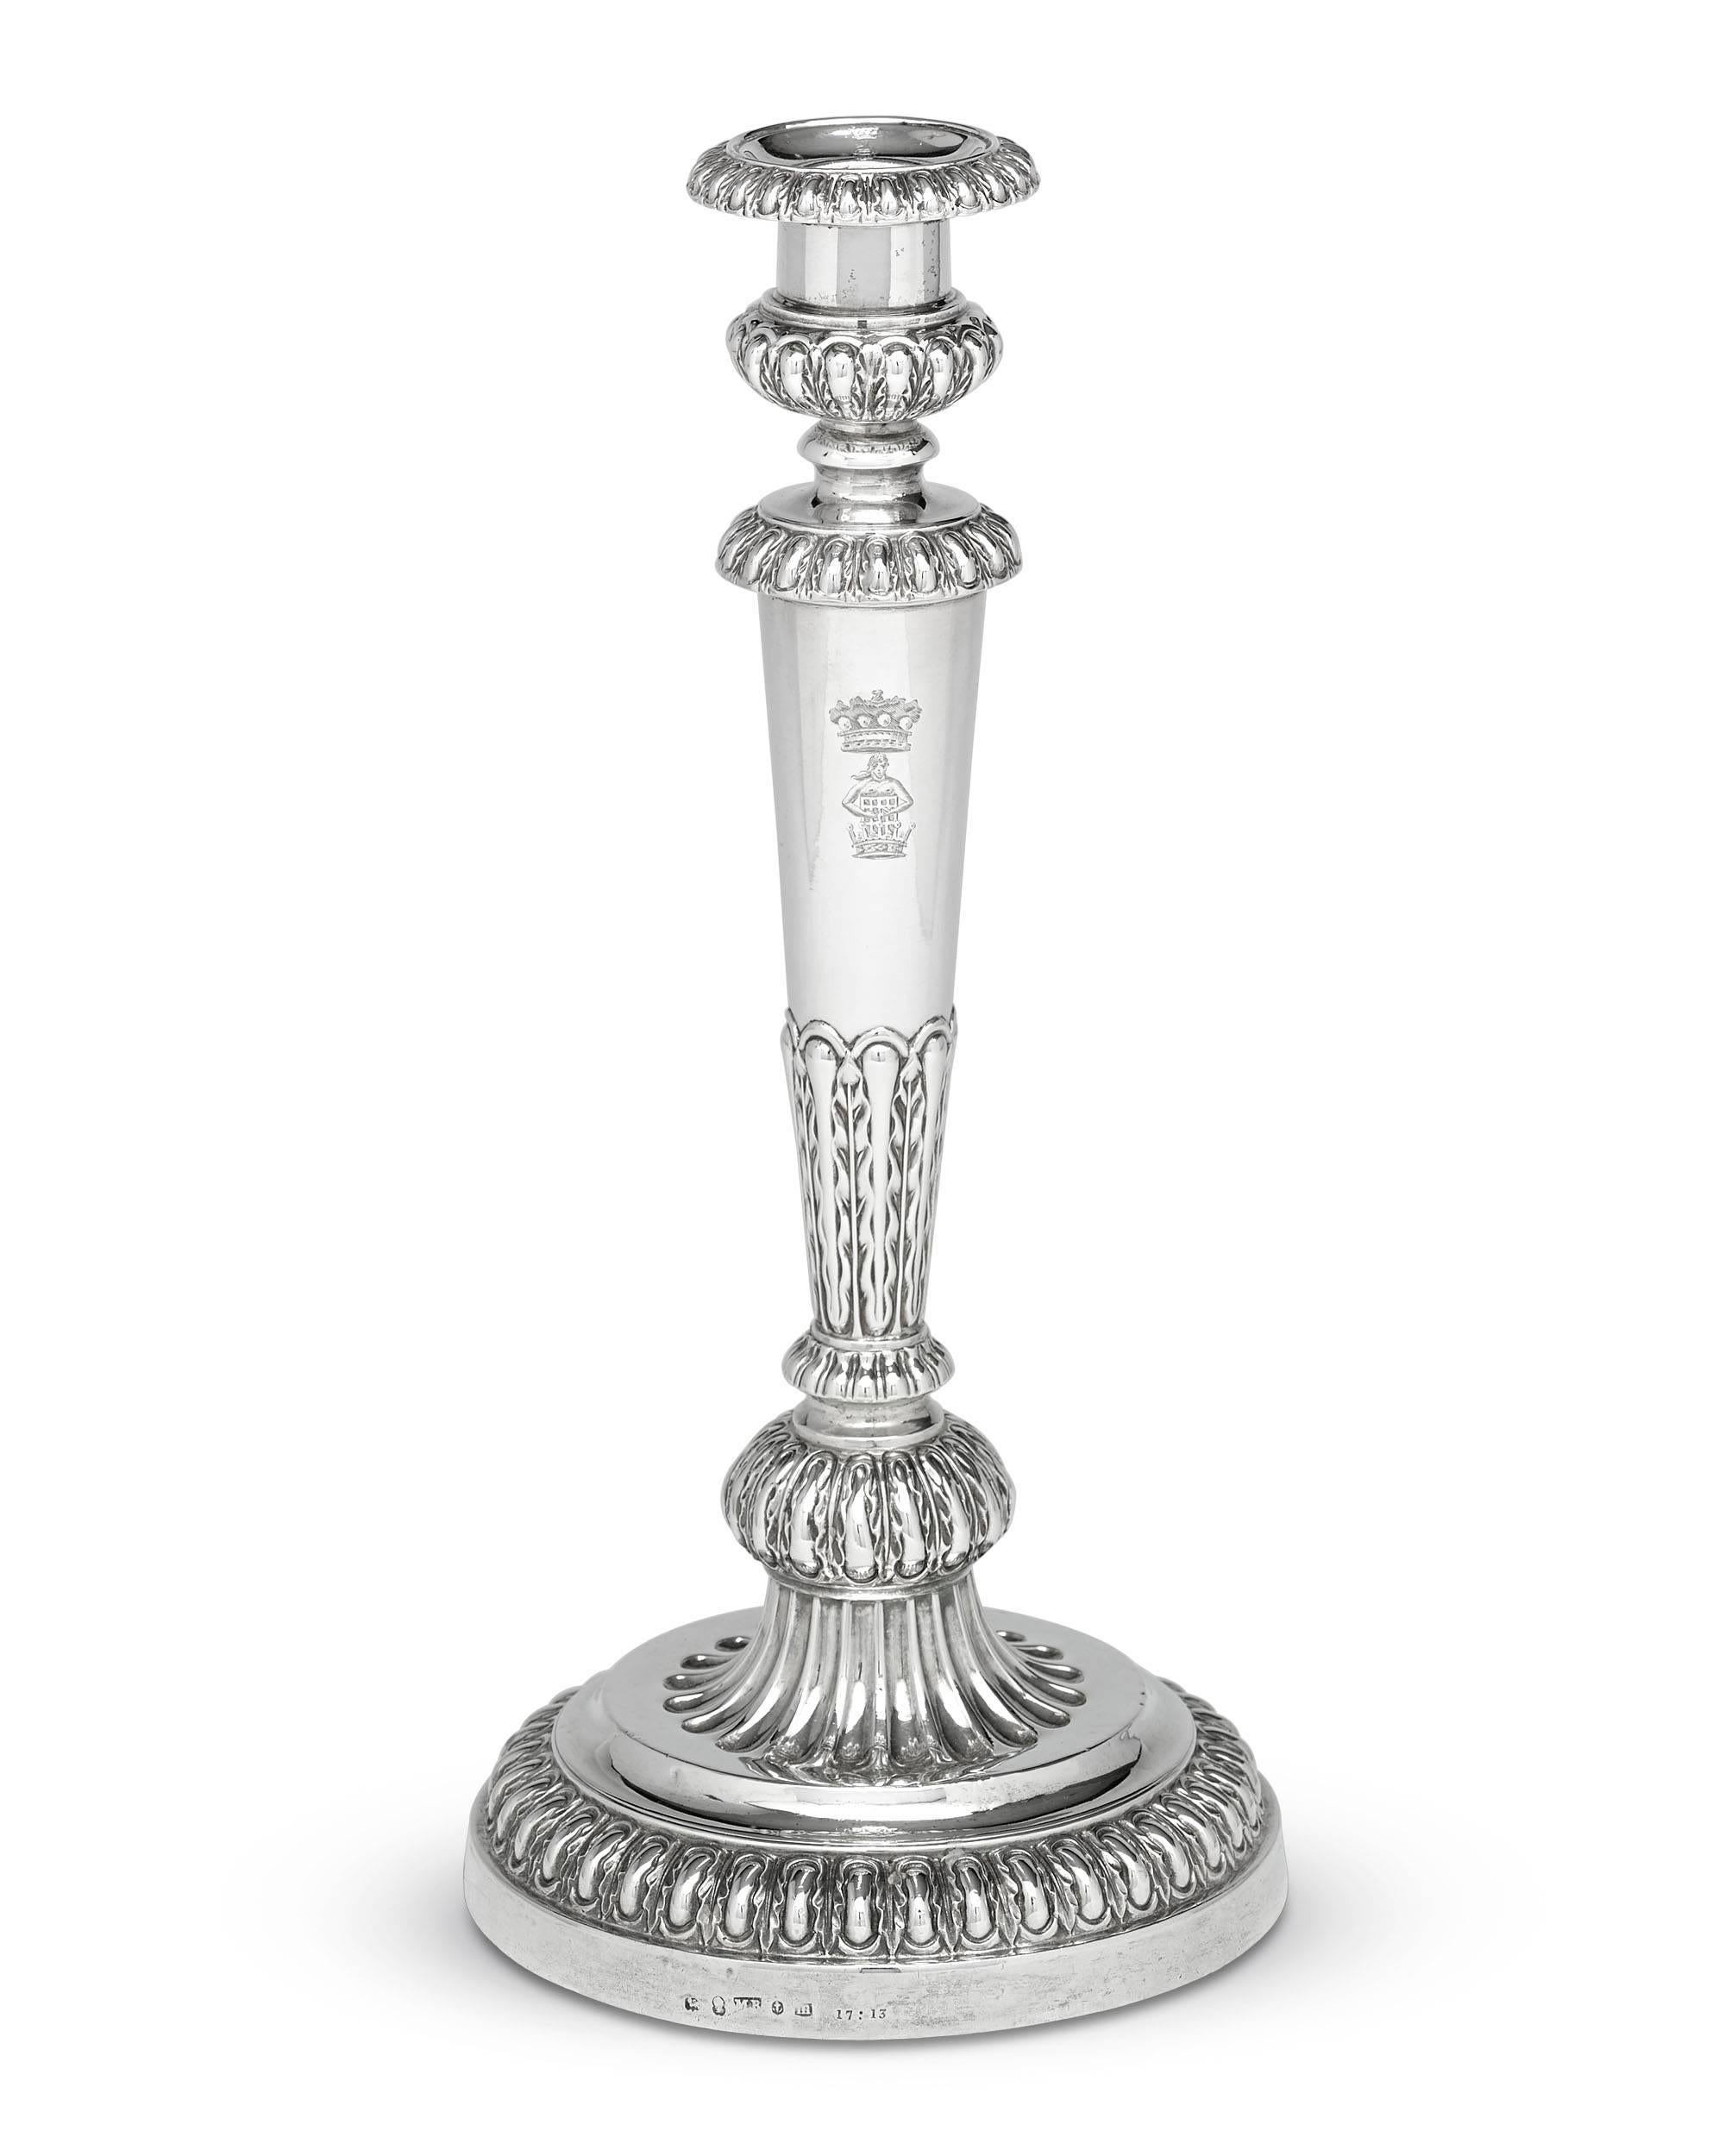 This rare and important set of four George III-period silver candlesticks were created by the renowned silversmith Matthew Boulton. Sterling works by Boulton are a rarity, especially those exhibiting the superior workmanship seen in the present